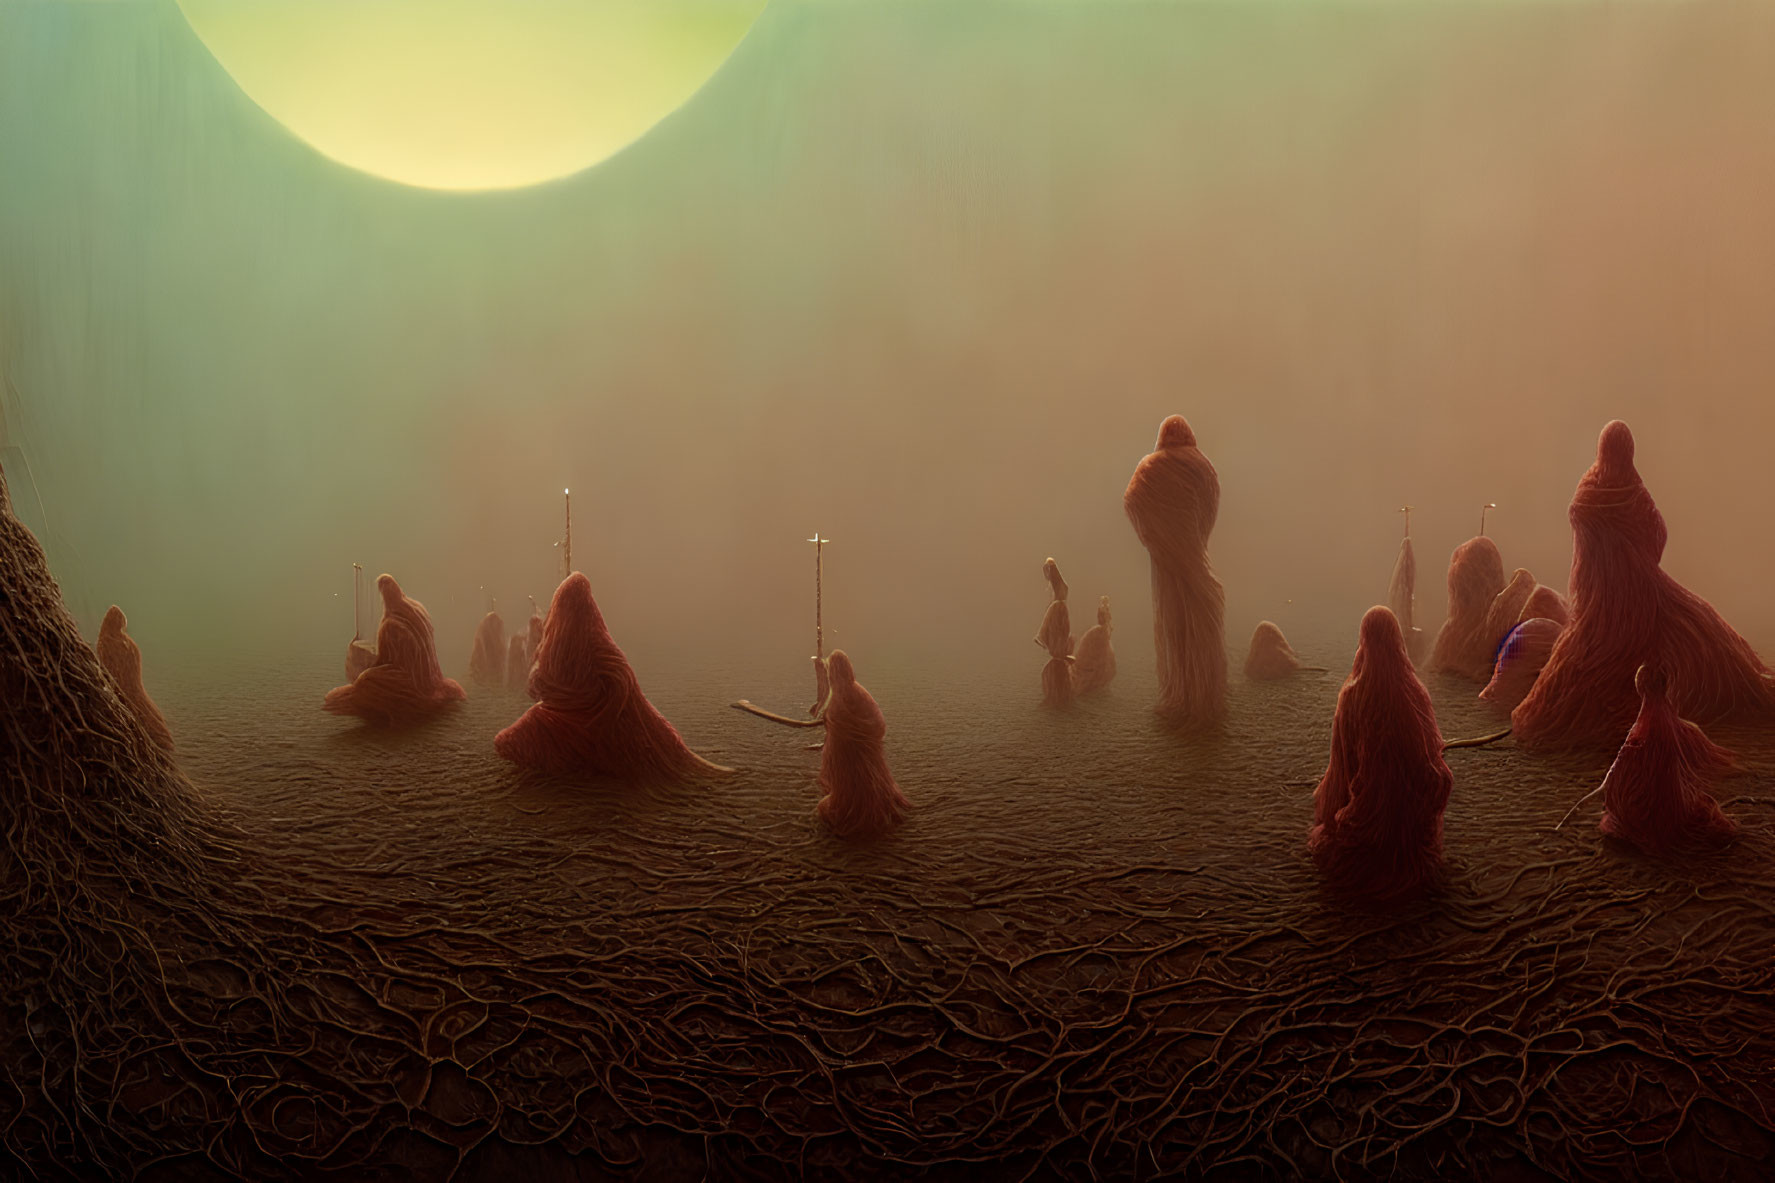 Ethereal landscape with humanoid figures in red cloaks under a yellow sun